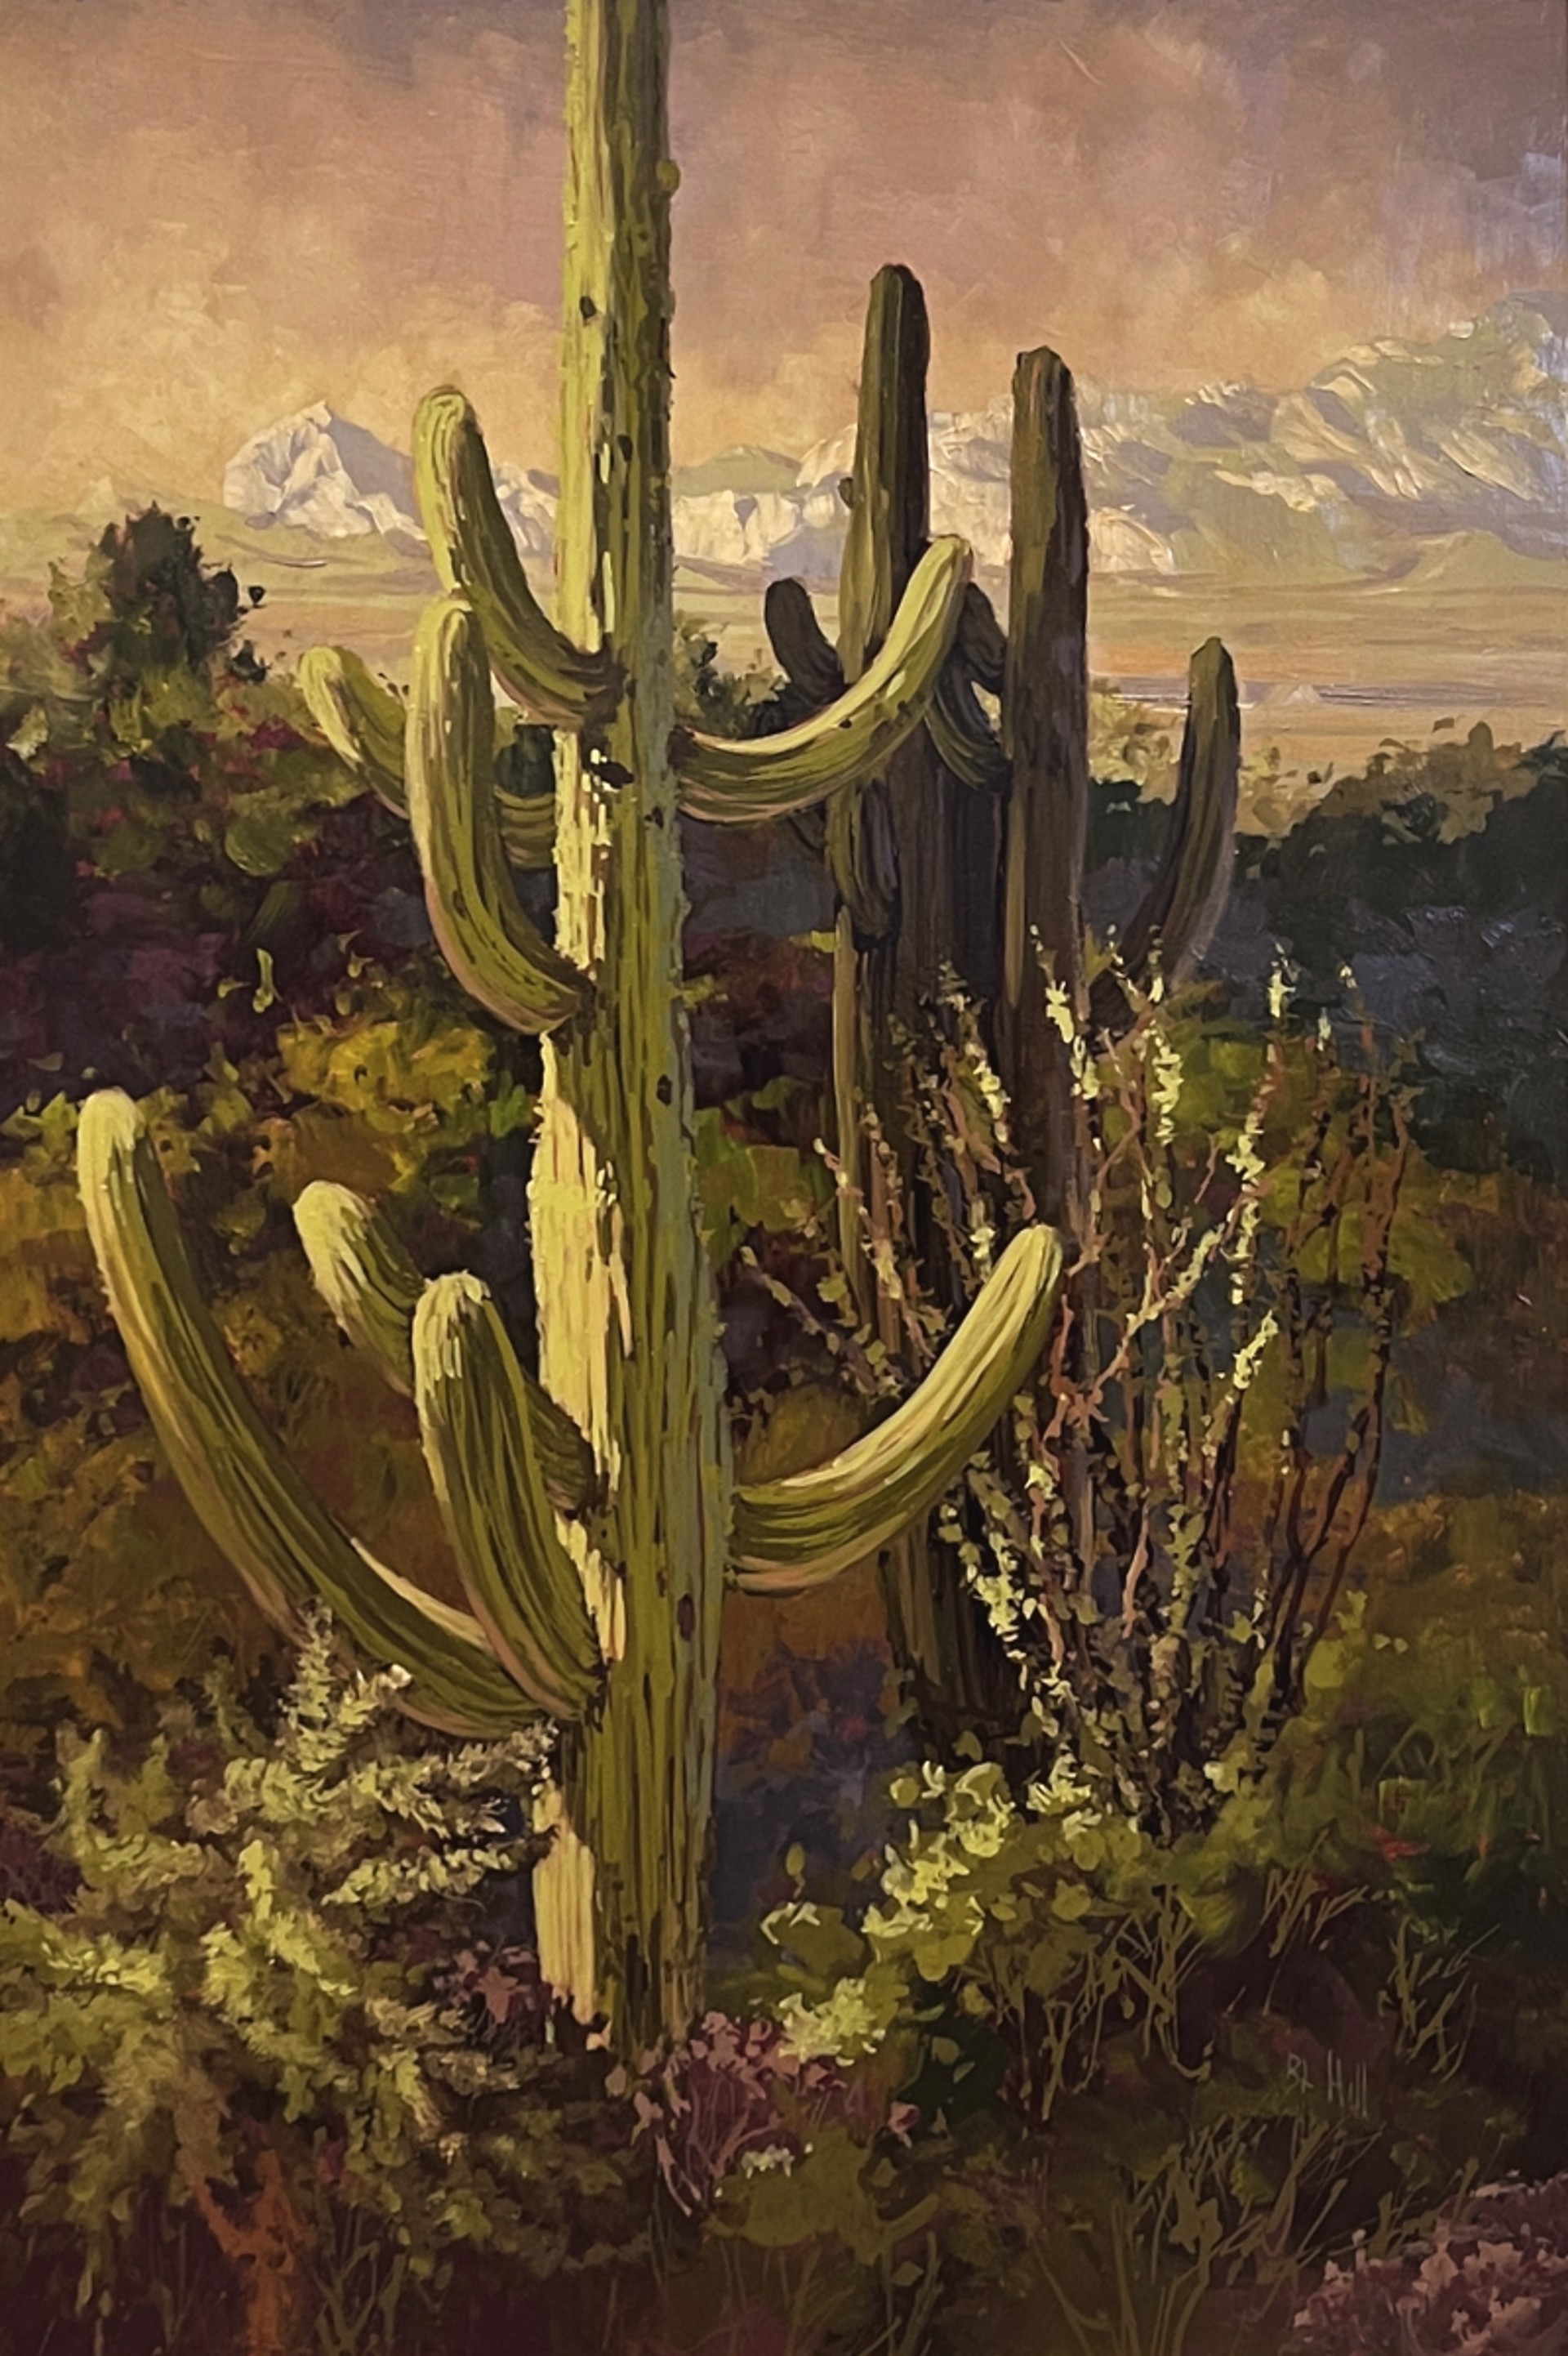 Treasures of the Desert by Barbara Hill